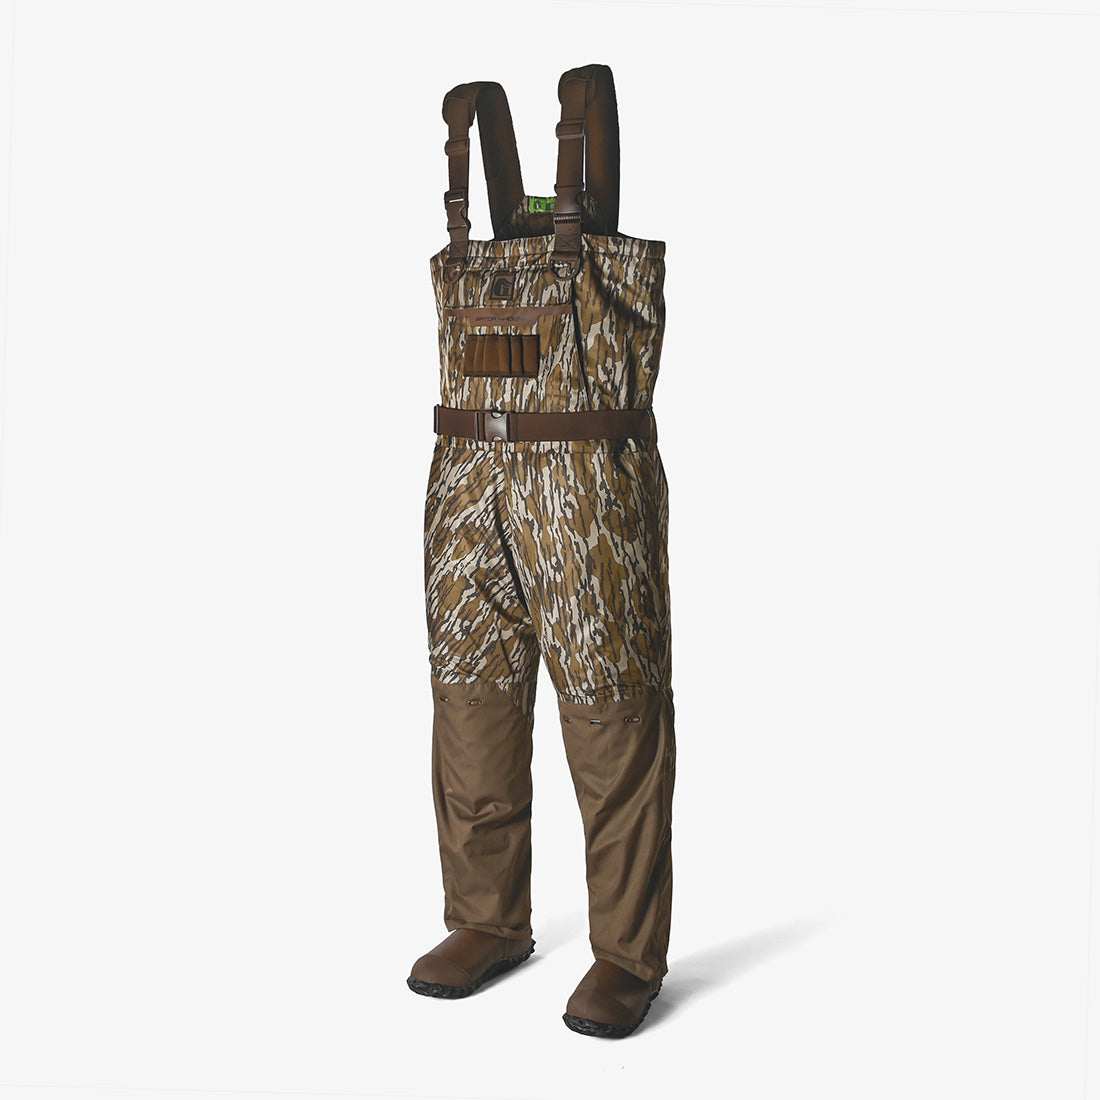 Gator Waders Men's Shield Series Insulated Breathable Waders - Originial Mossy Oak Bottomland